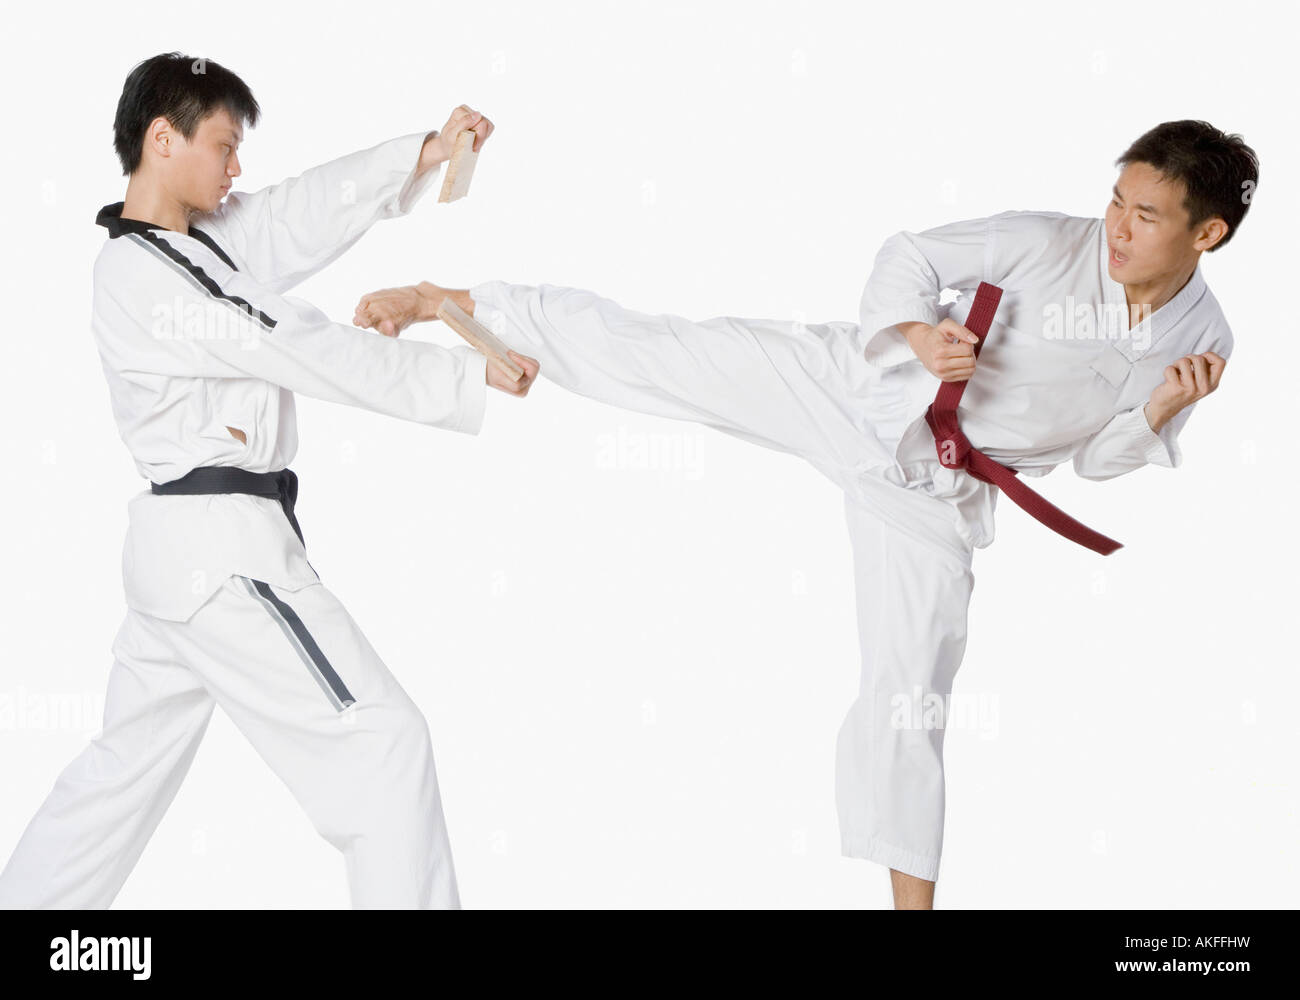 Mid adult man practicing kickboxing with a young man Stock Photo